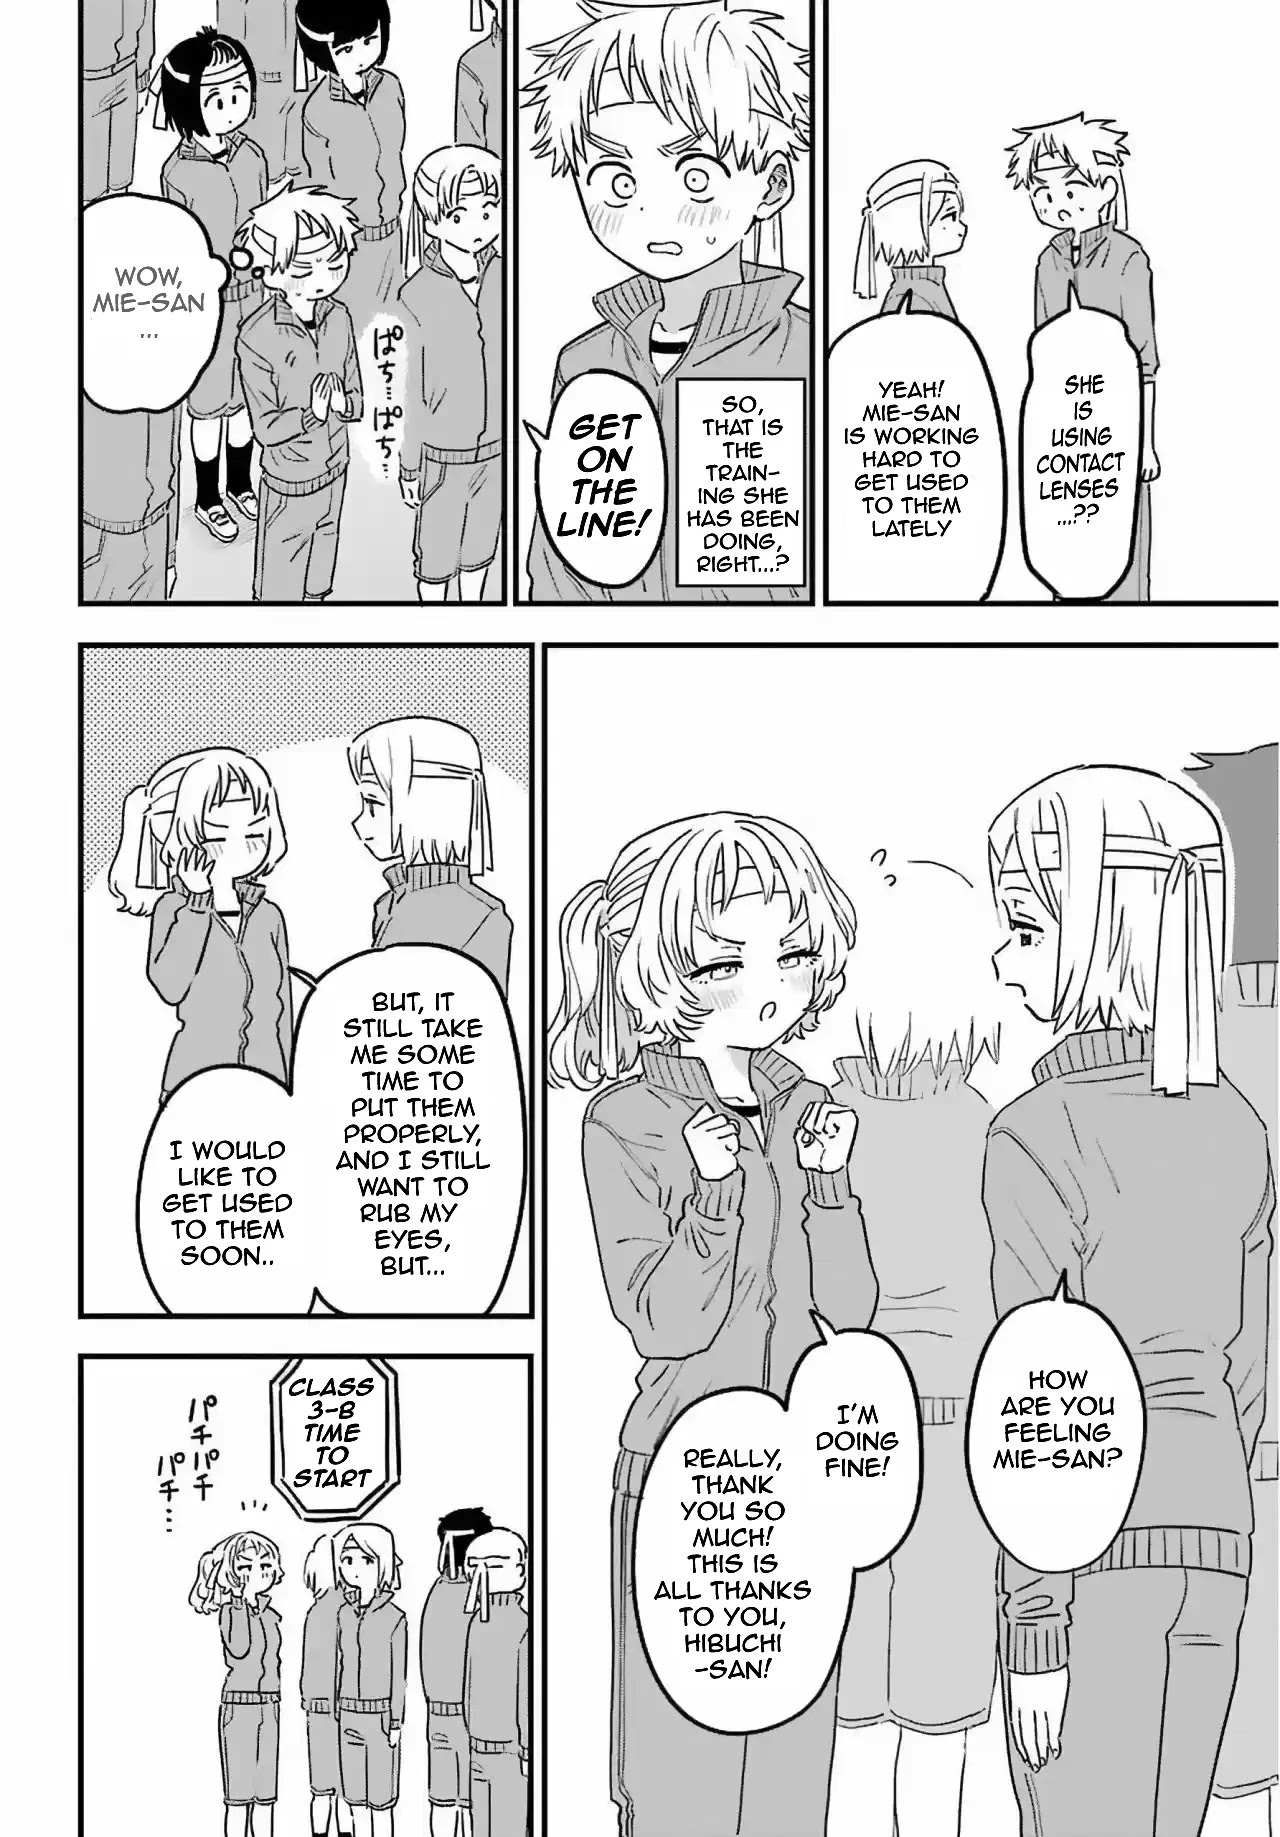 The Girl I Like Forgot Her Glasses chapter 84 page 5